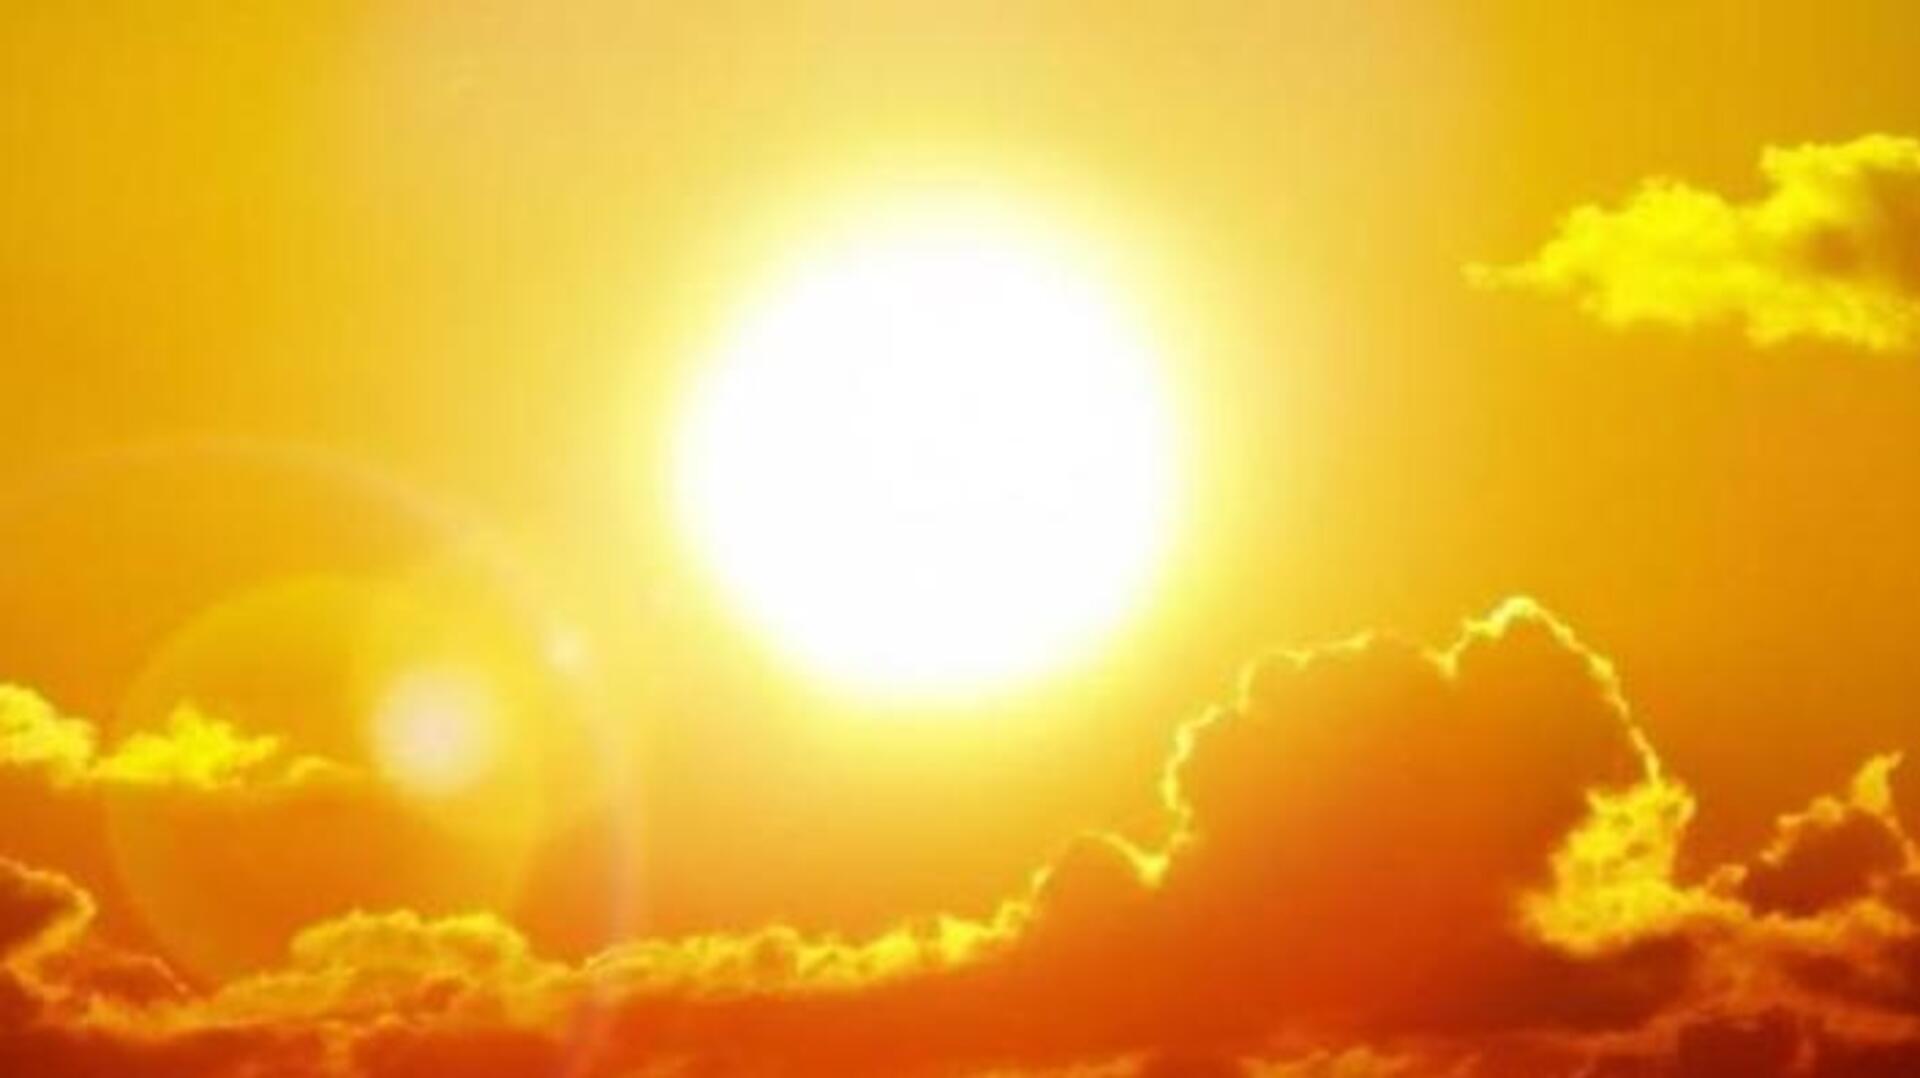 July 2023 may be hottest month ever: NASA's climate expert